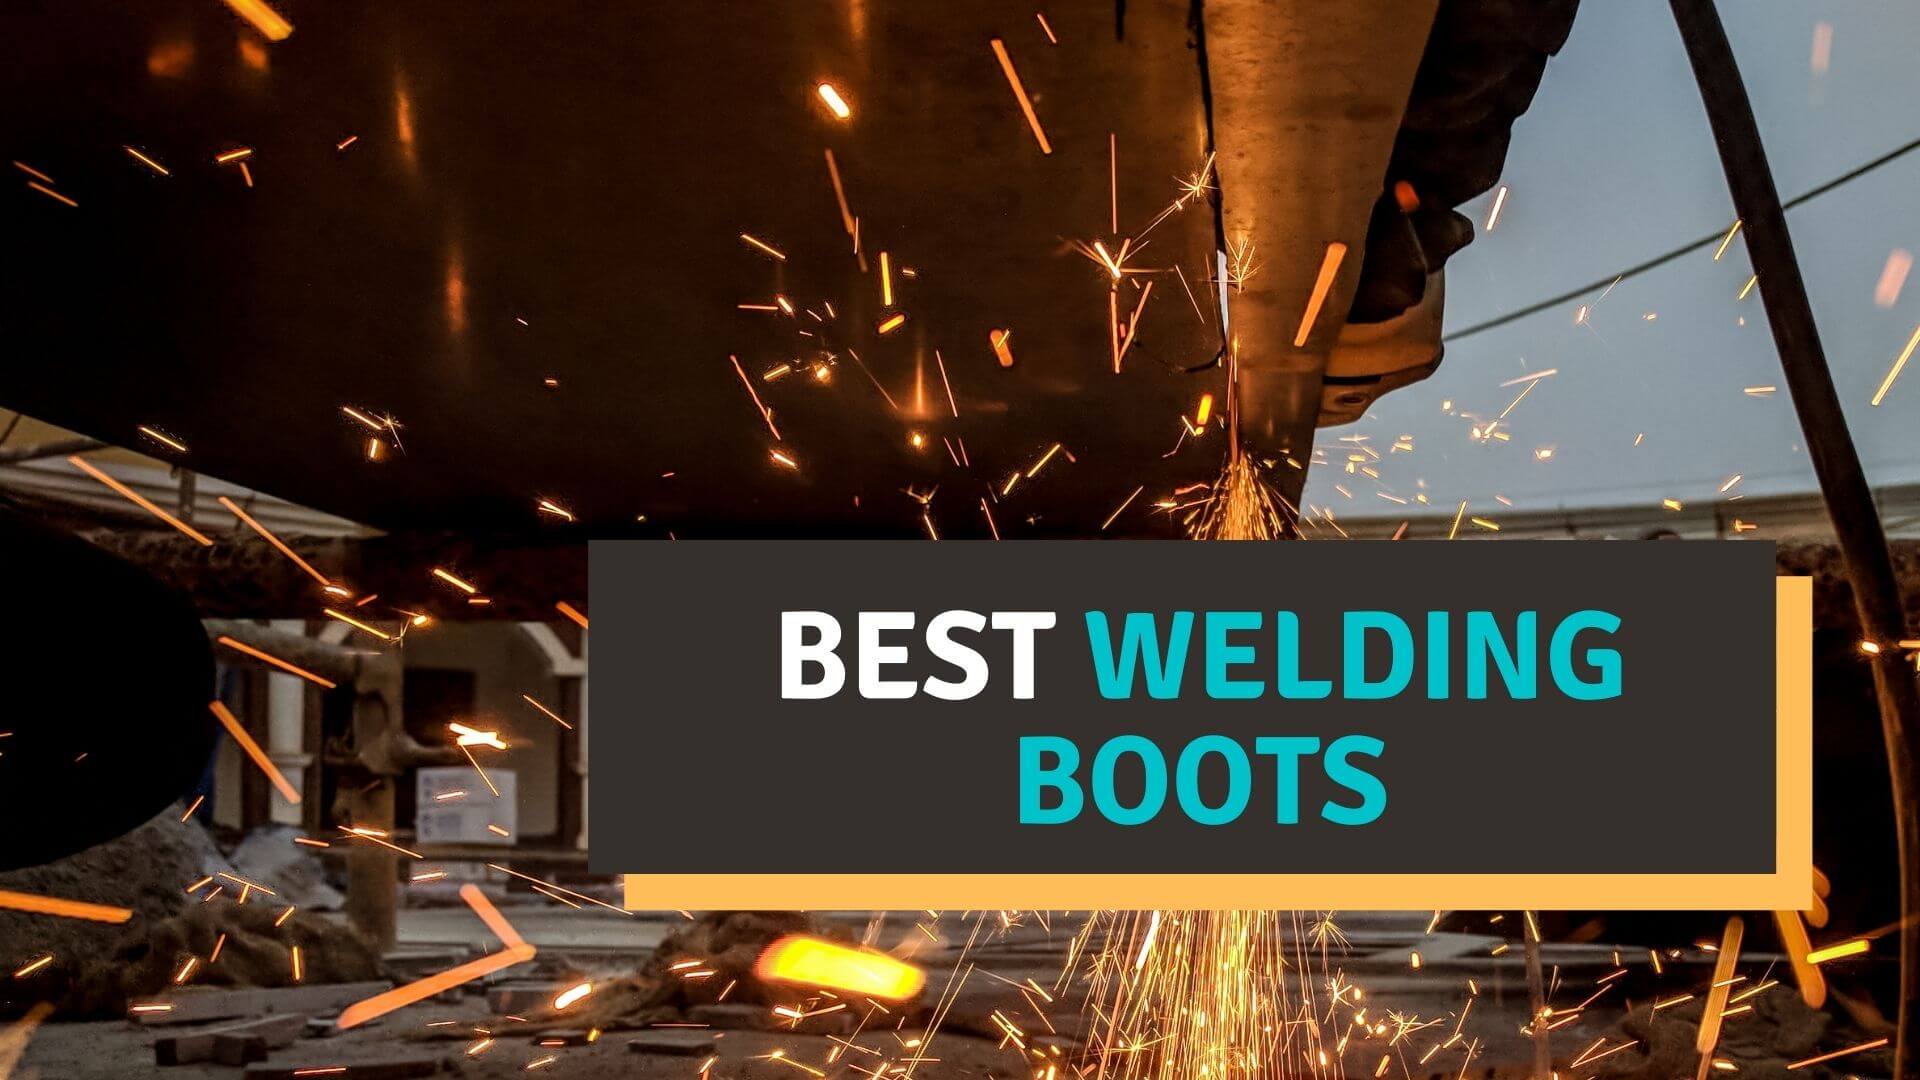 Best Welding Boots Reviews 2022 – Our Top Picks